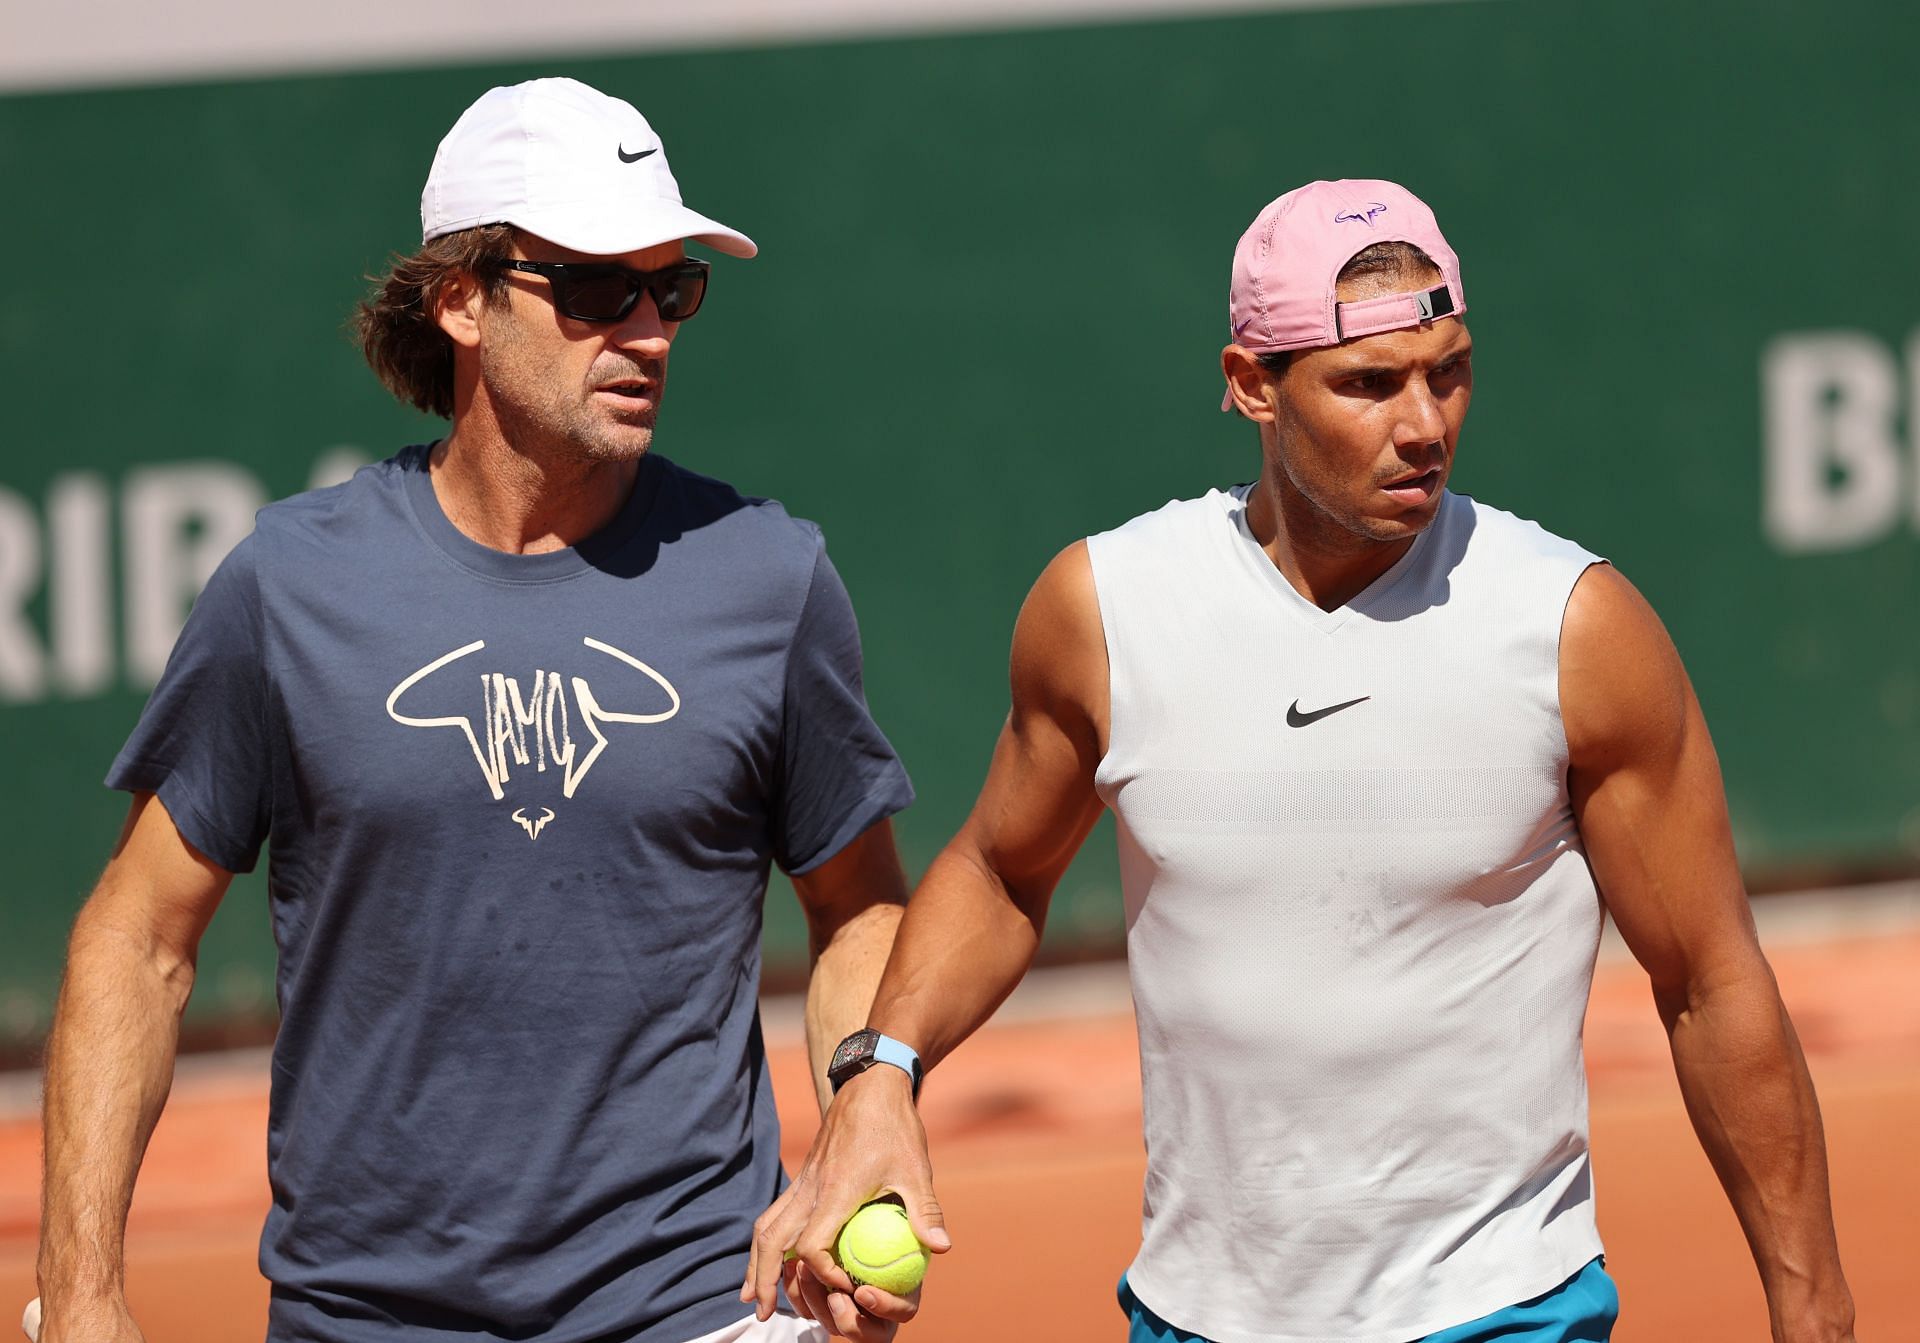 Carlos Moya is now part of Rafael Nadal&#039;s entourage and has helped him win seven Grand Slams